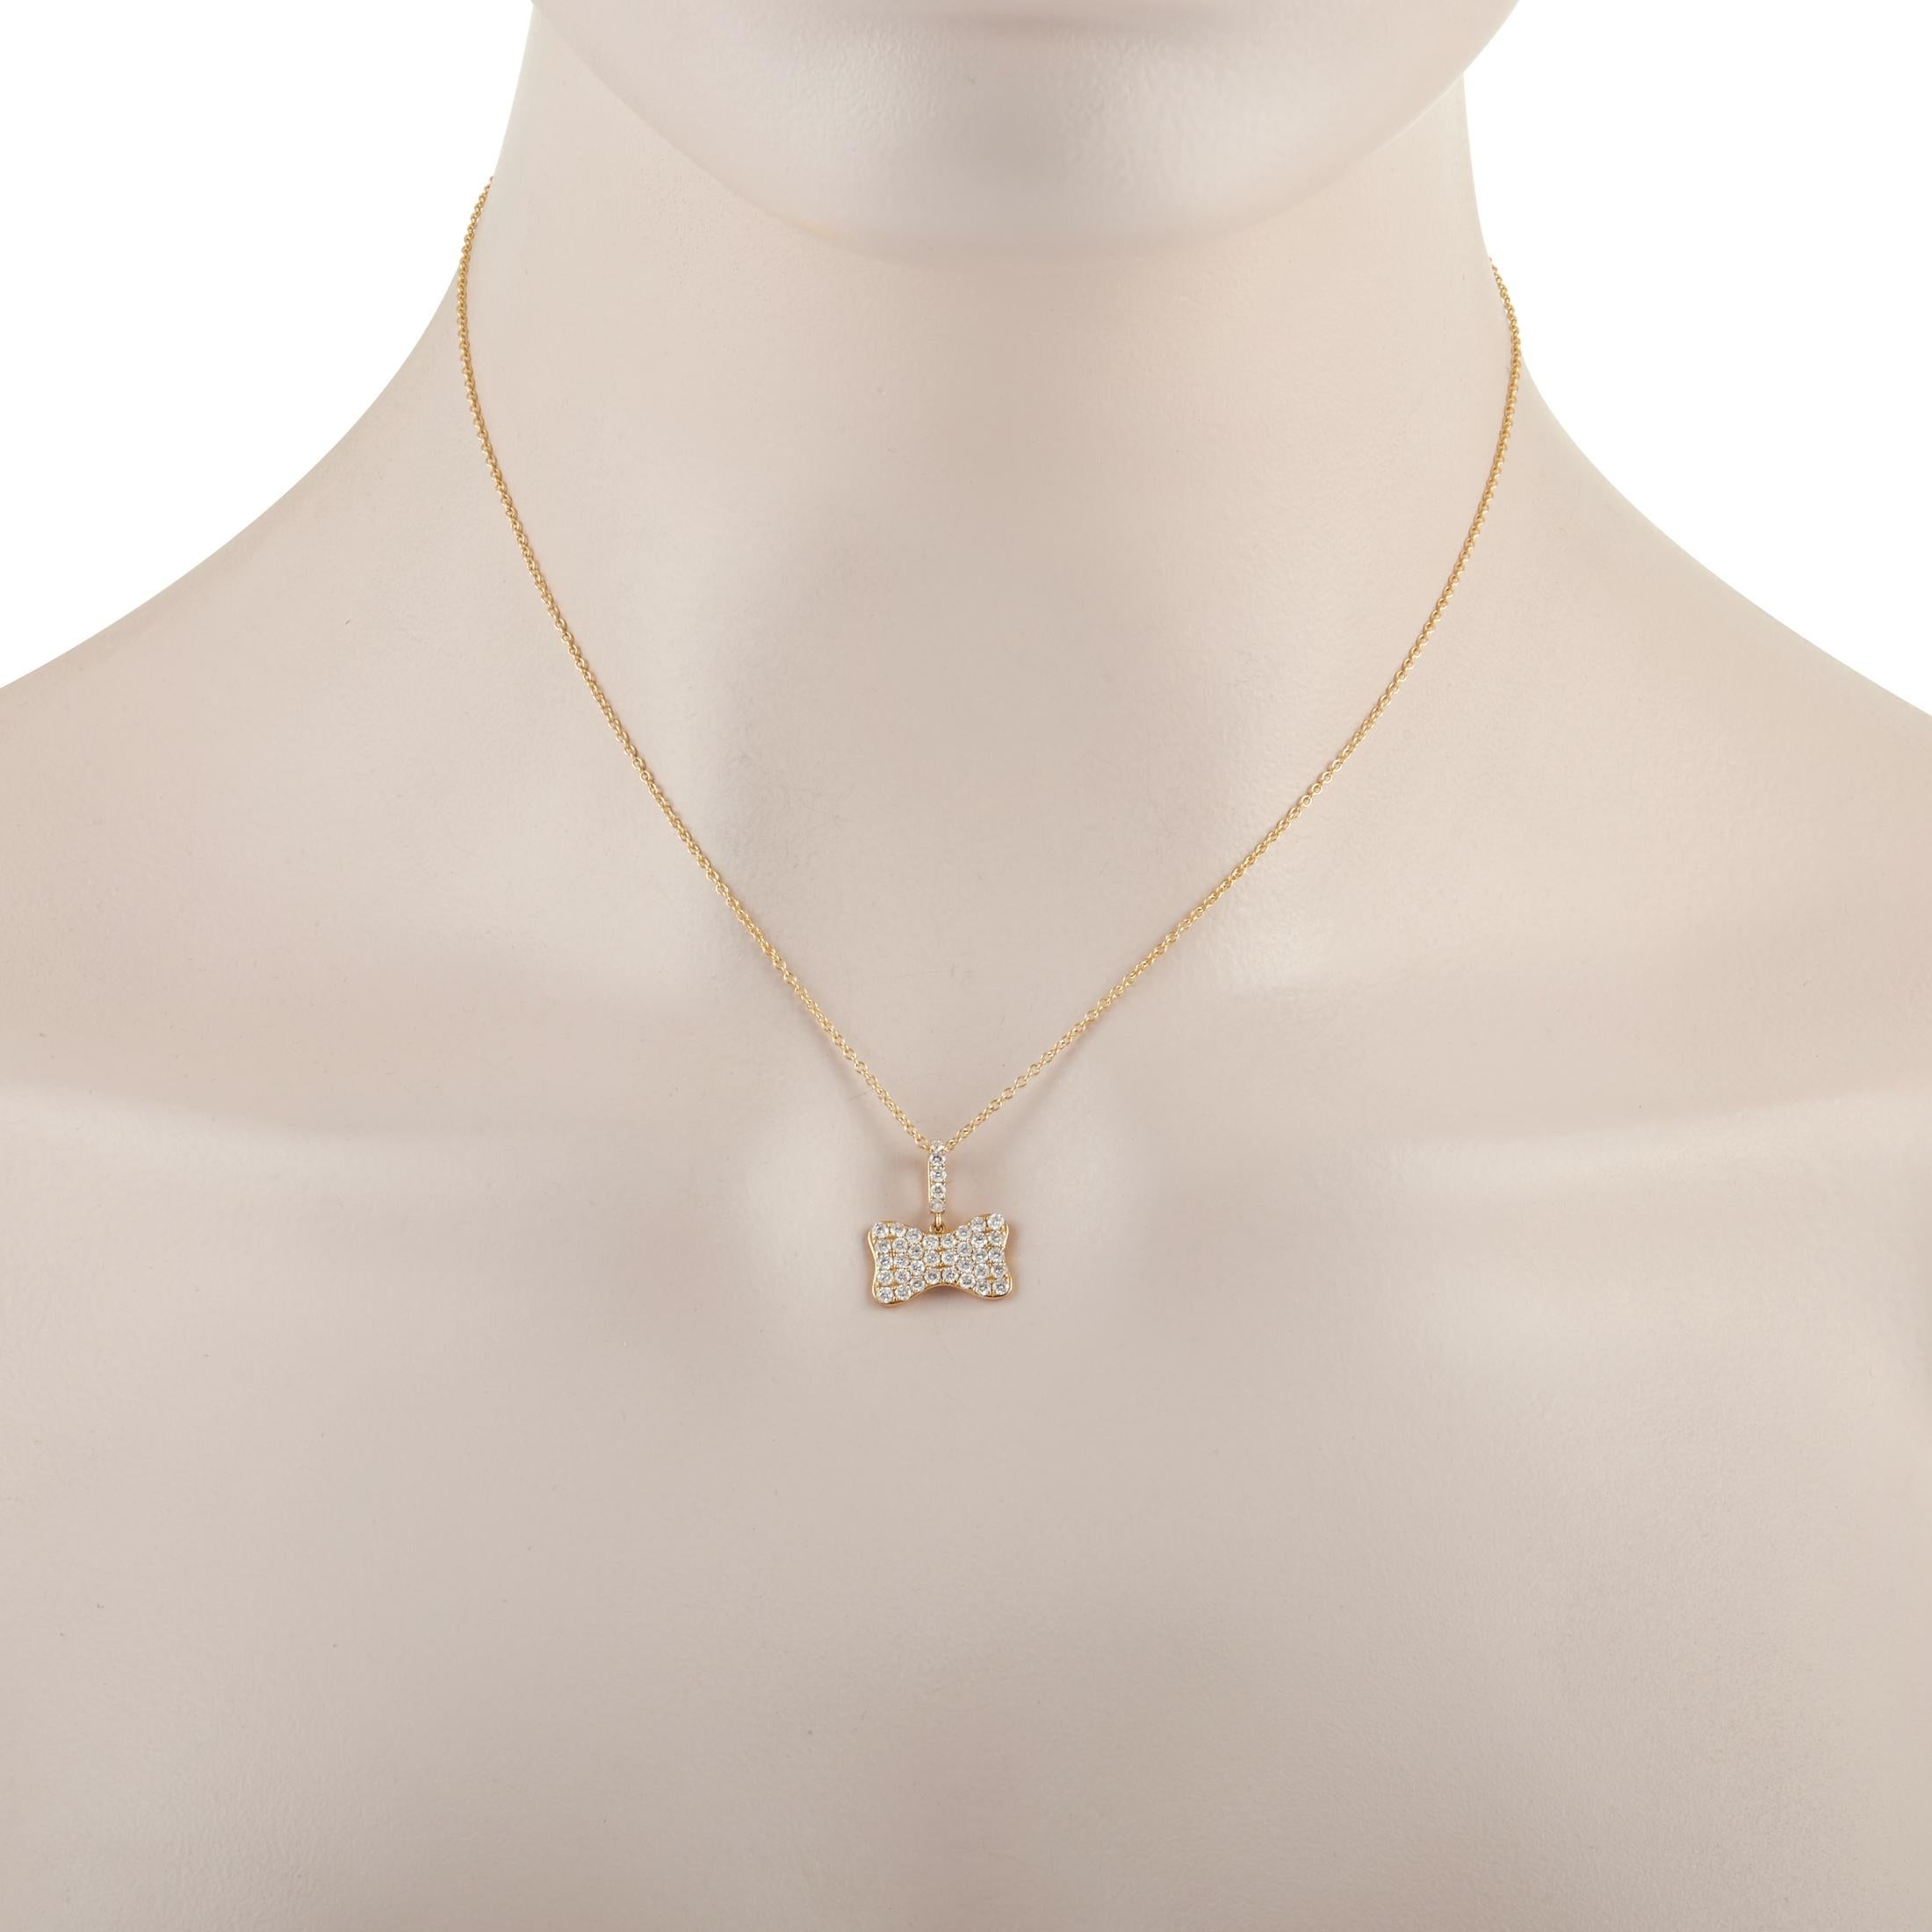 This cute LB Exclusive 18K Yellow Gold 0.80 ct Diamond Bow Pendant Necklace is made with an 18K yellow gold chain and features a yellow gold bow shaped pendant set with round diamonds measuring 0.80 carats. The dainty 18K yellow gold chain measures